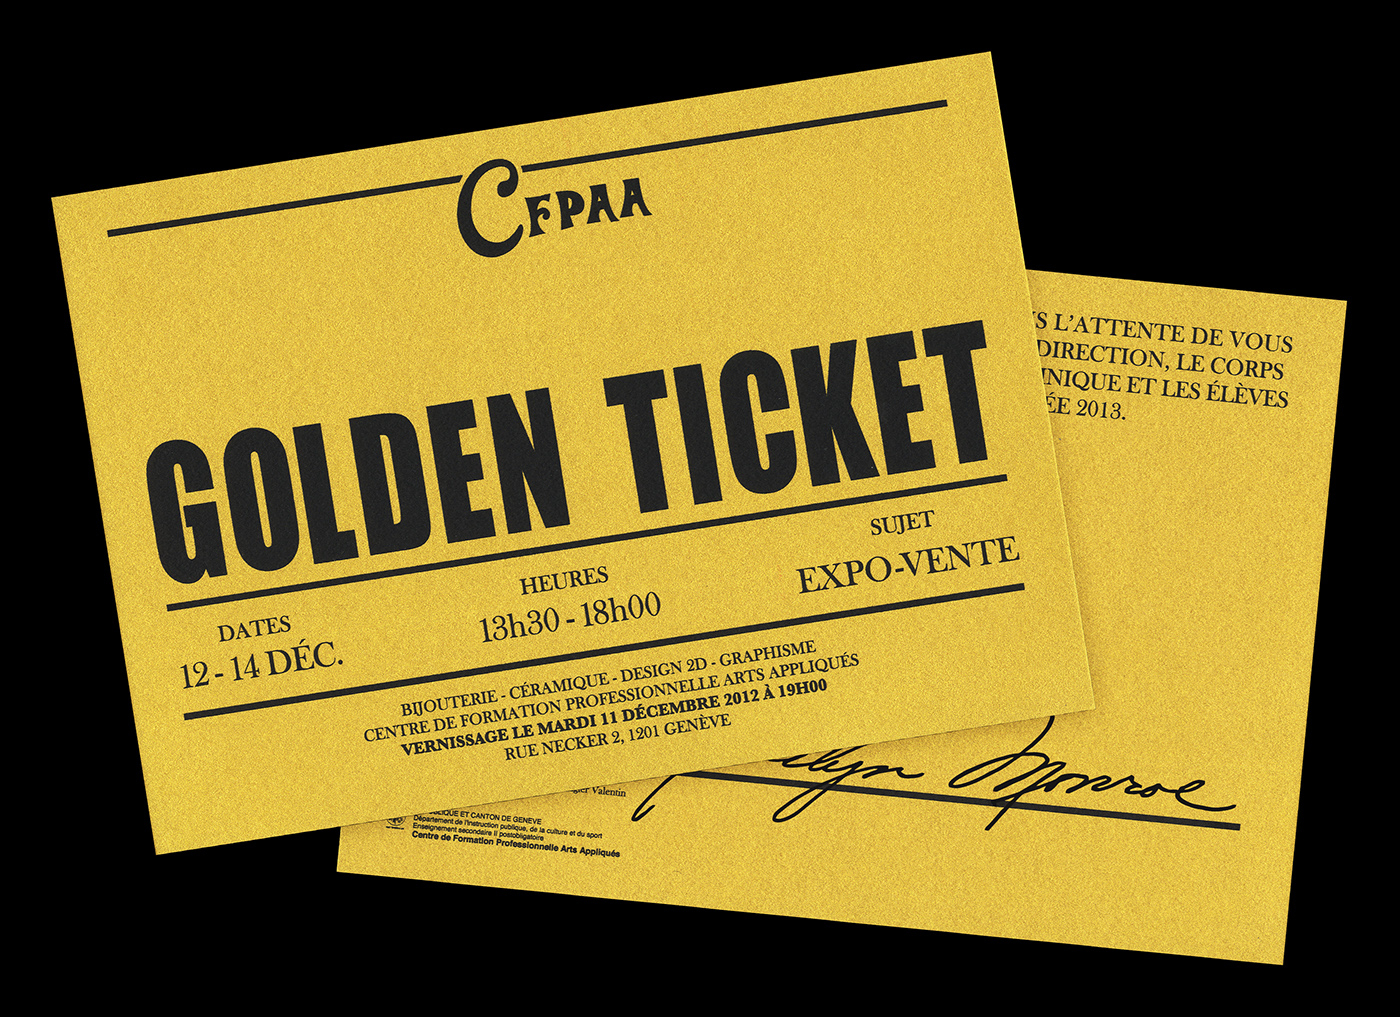 golden Or ticket exposition cfpaa eaa Chocolaterie Charlie charlie et la concours gagnant flyer poster